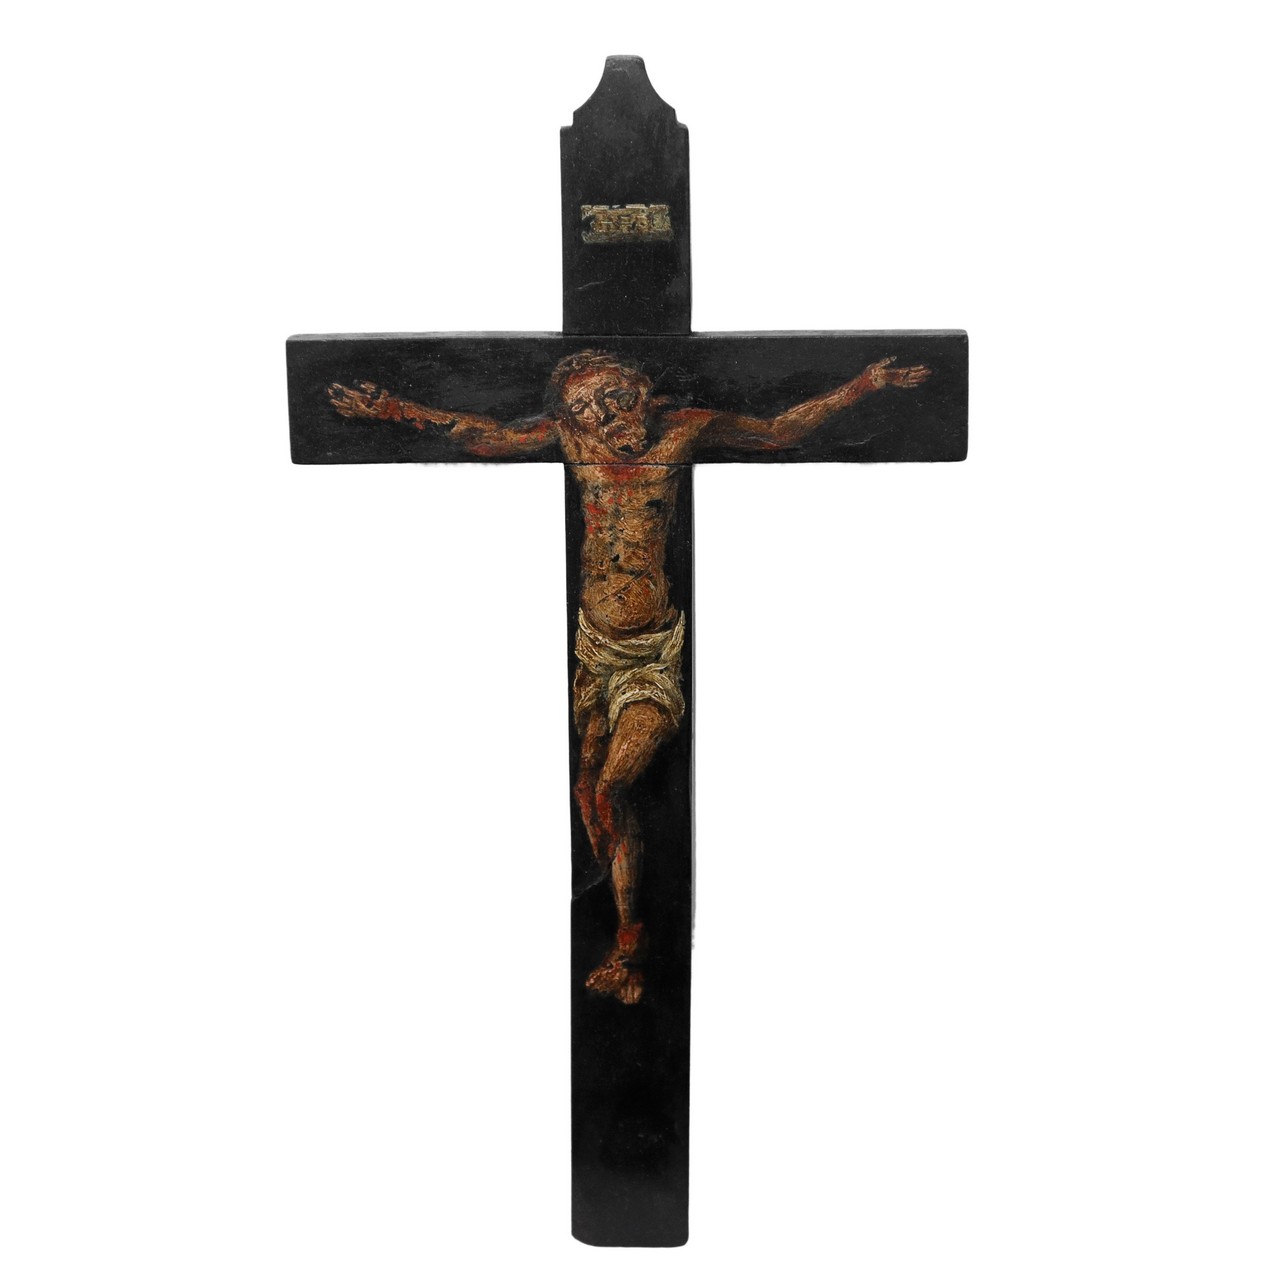 Crucifix painted on wood, Sicily, 17th century